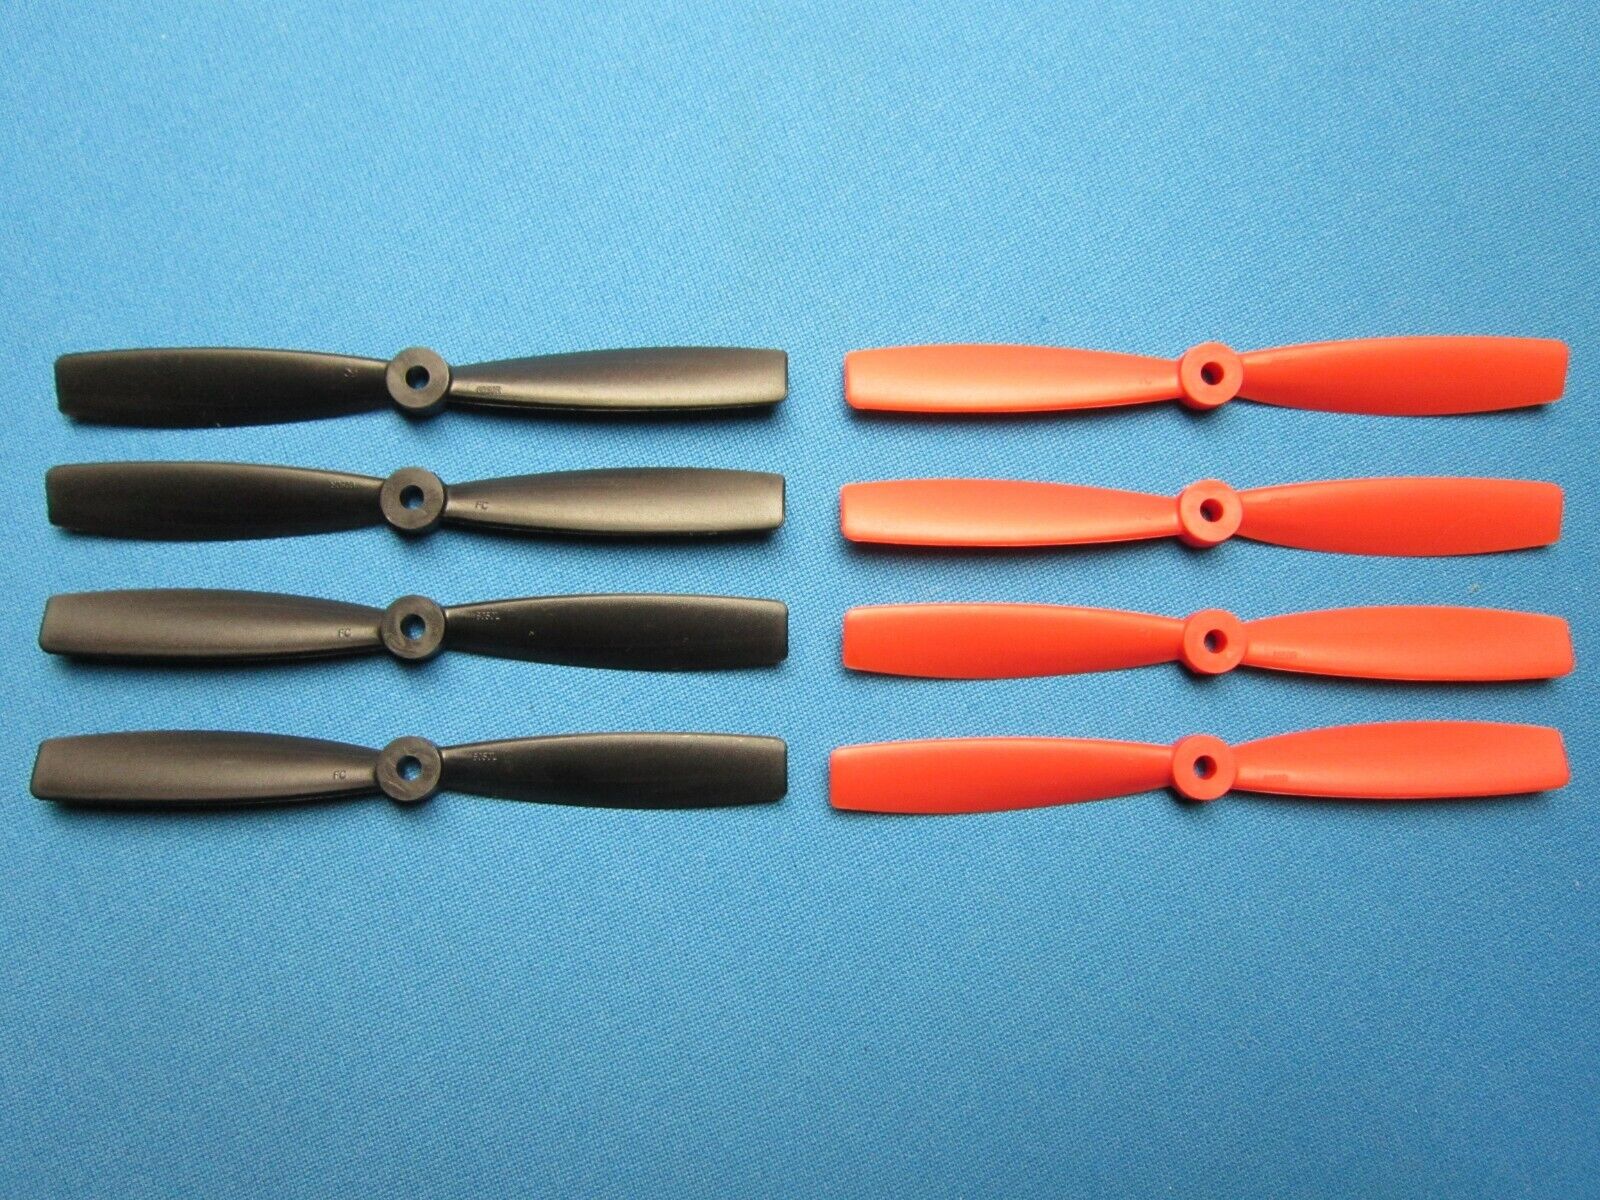 4 PAIR HKING 6050 SELF TIGHTENING POLYCARBONATE BULL NOSE PROPELLERS CW/CCW RC